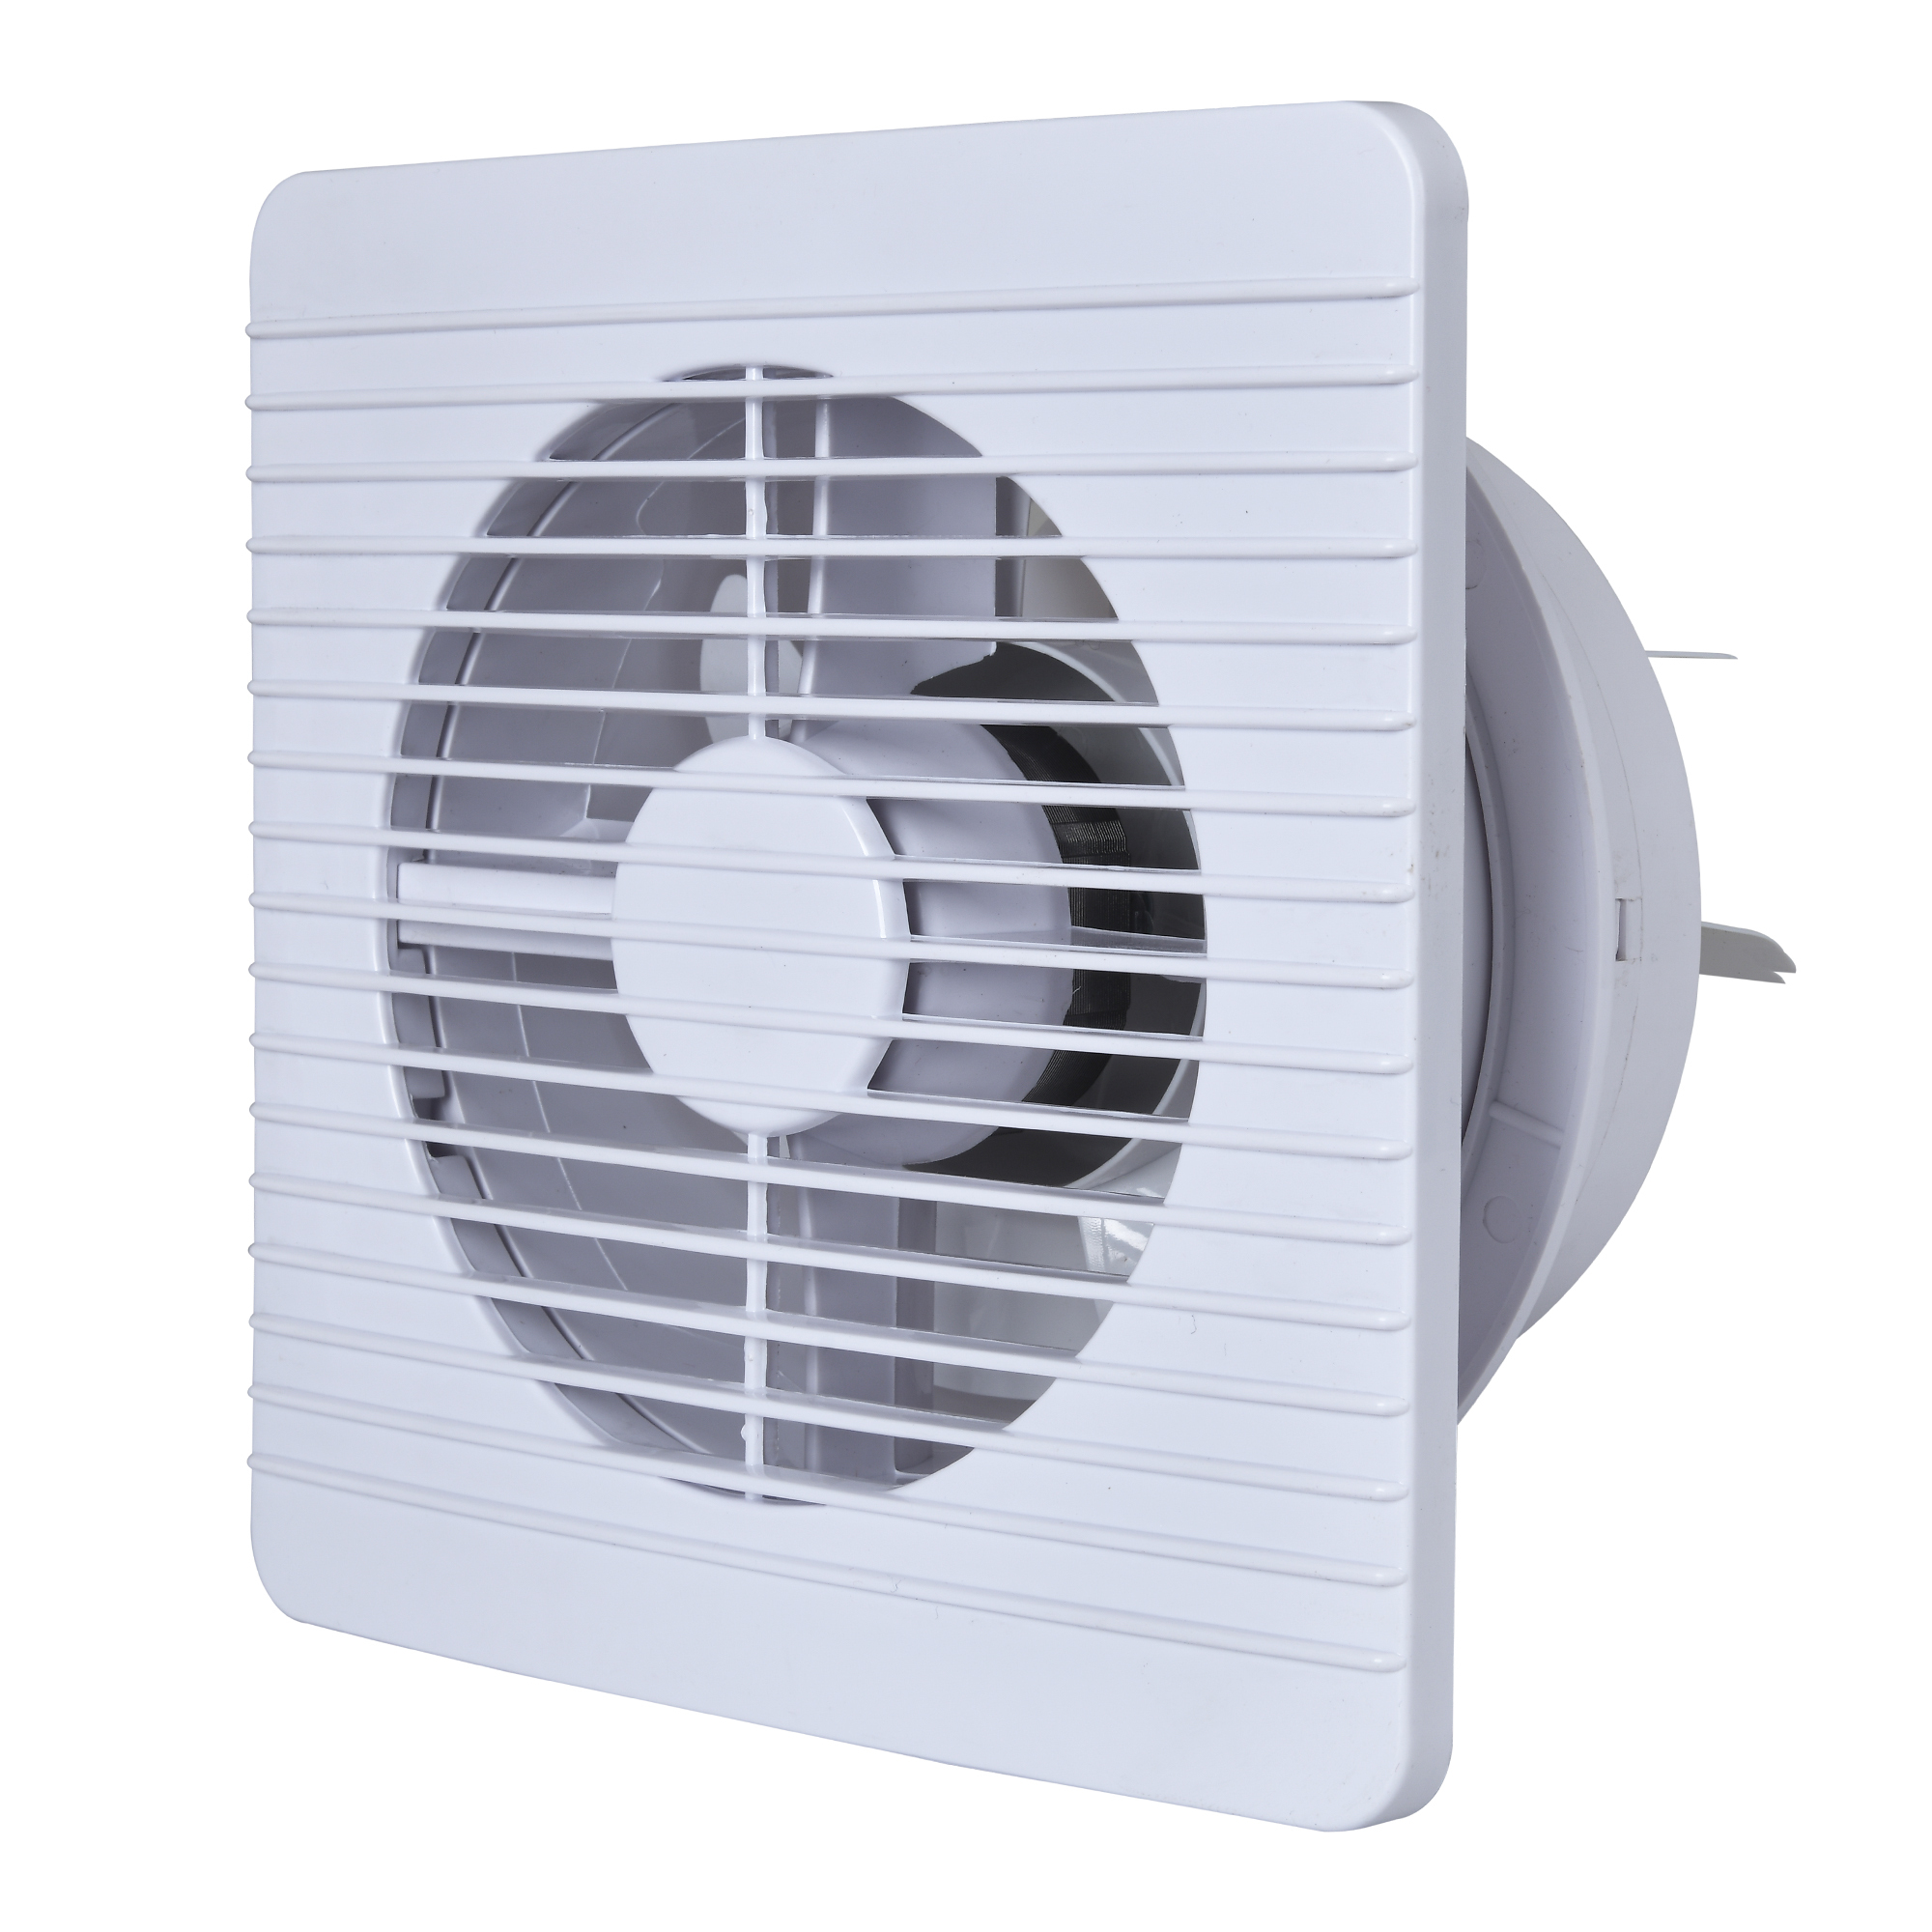 Leo 150 mm Exhaust Fan with Back Flaps